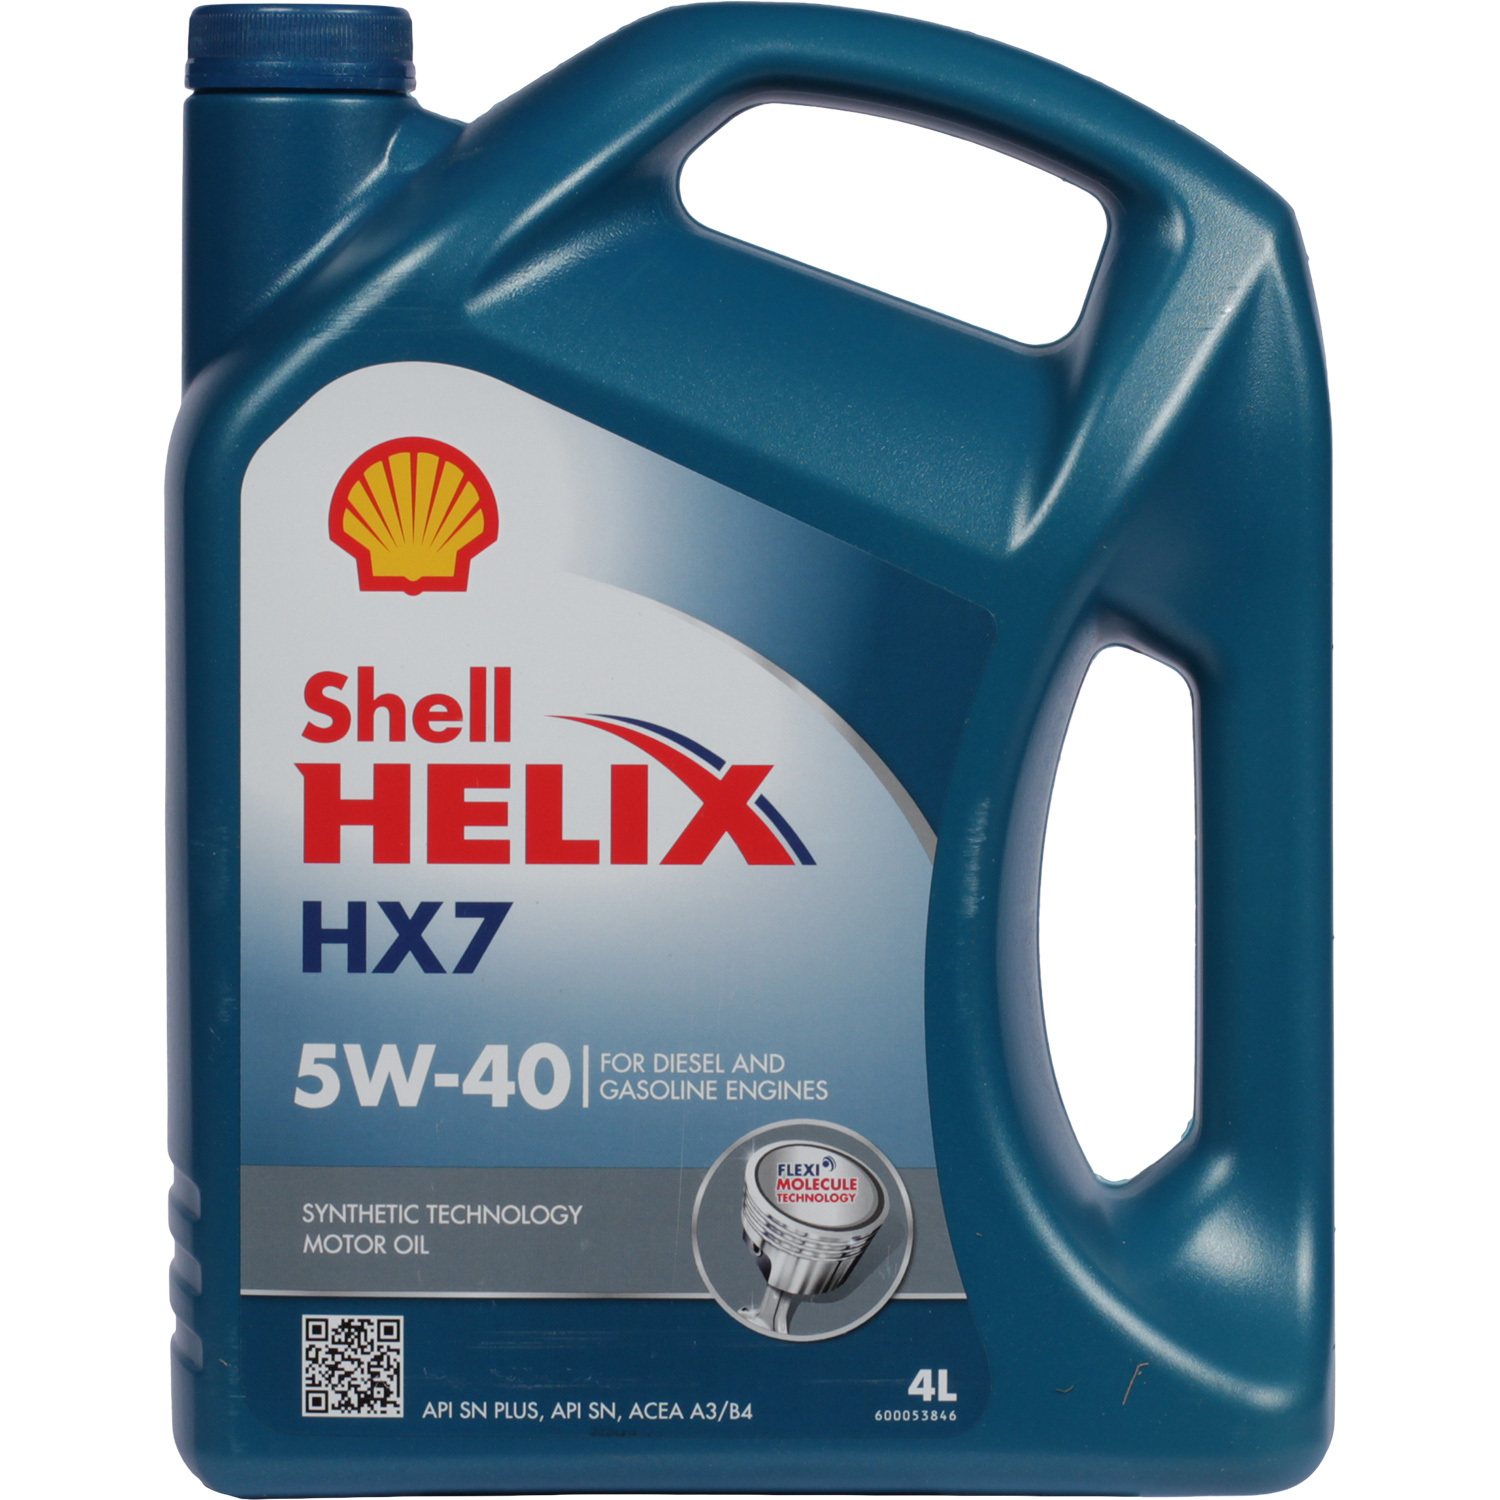 Shell Моторное масло Shell Helix HX7 5W-40, 4 л shell моторное масло shell helix hx8 5w 30 1 л